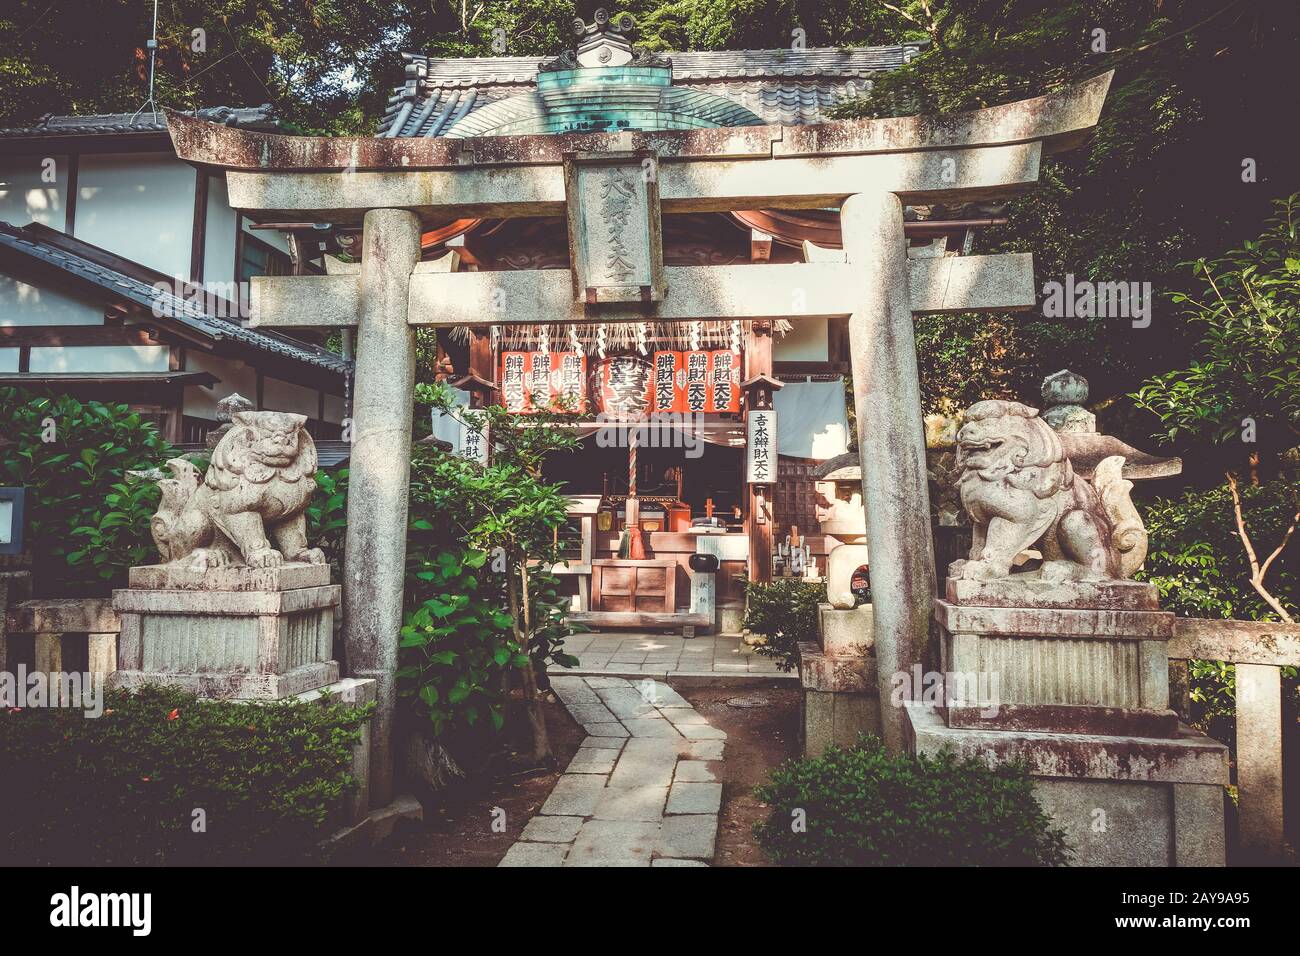 Chion-in temple garden, Kyoto, Japan Stock Photo